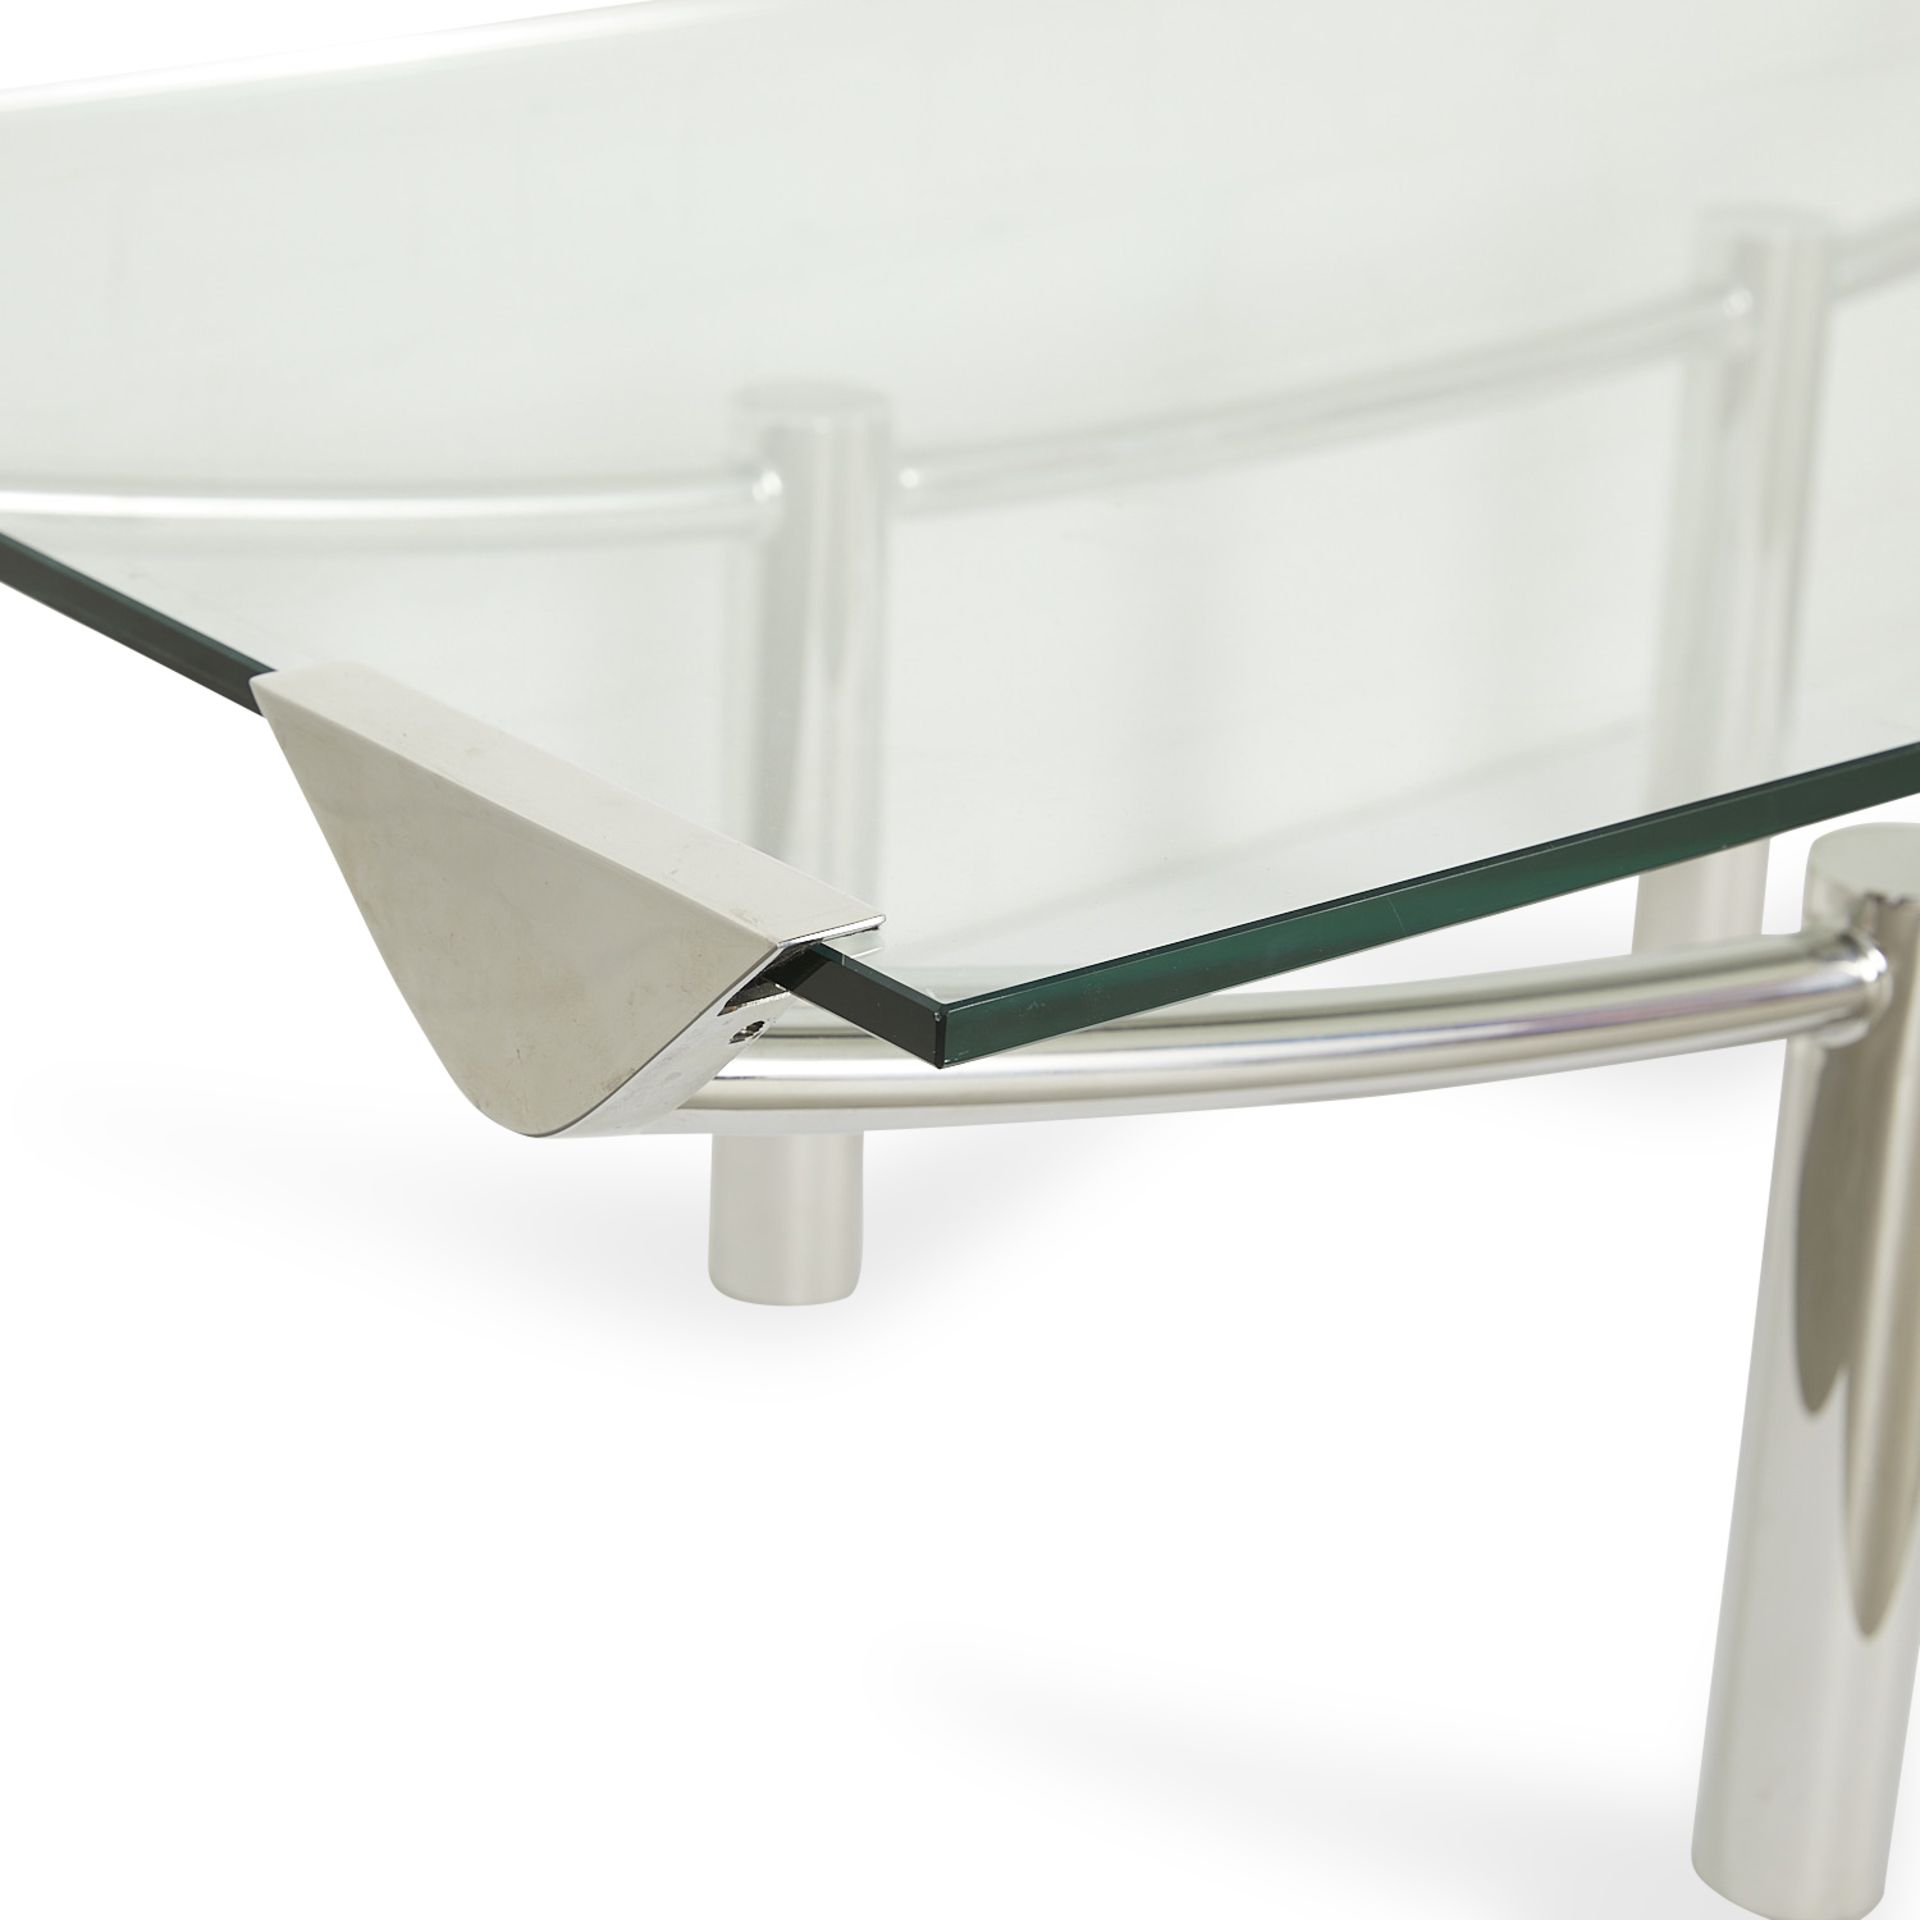 Brueton "Structures" Low Coffee Table w/ Glass Top - Image 2 of 12